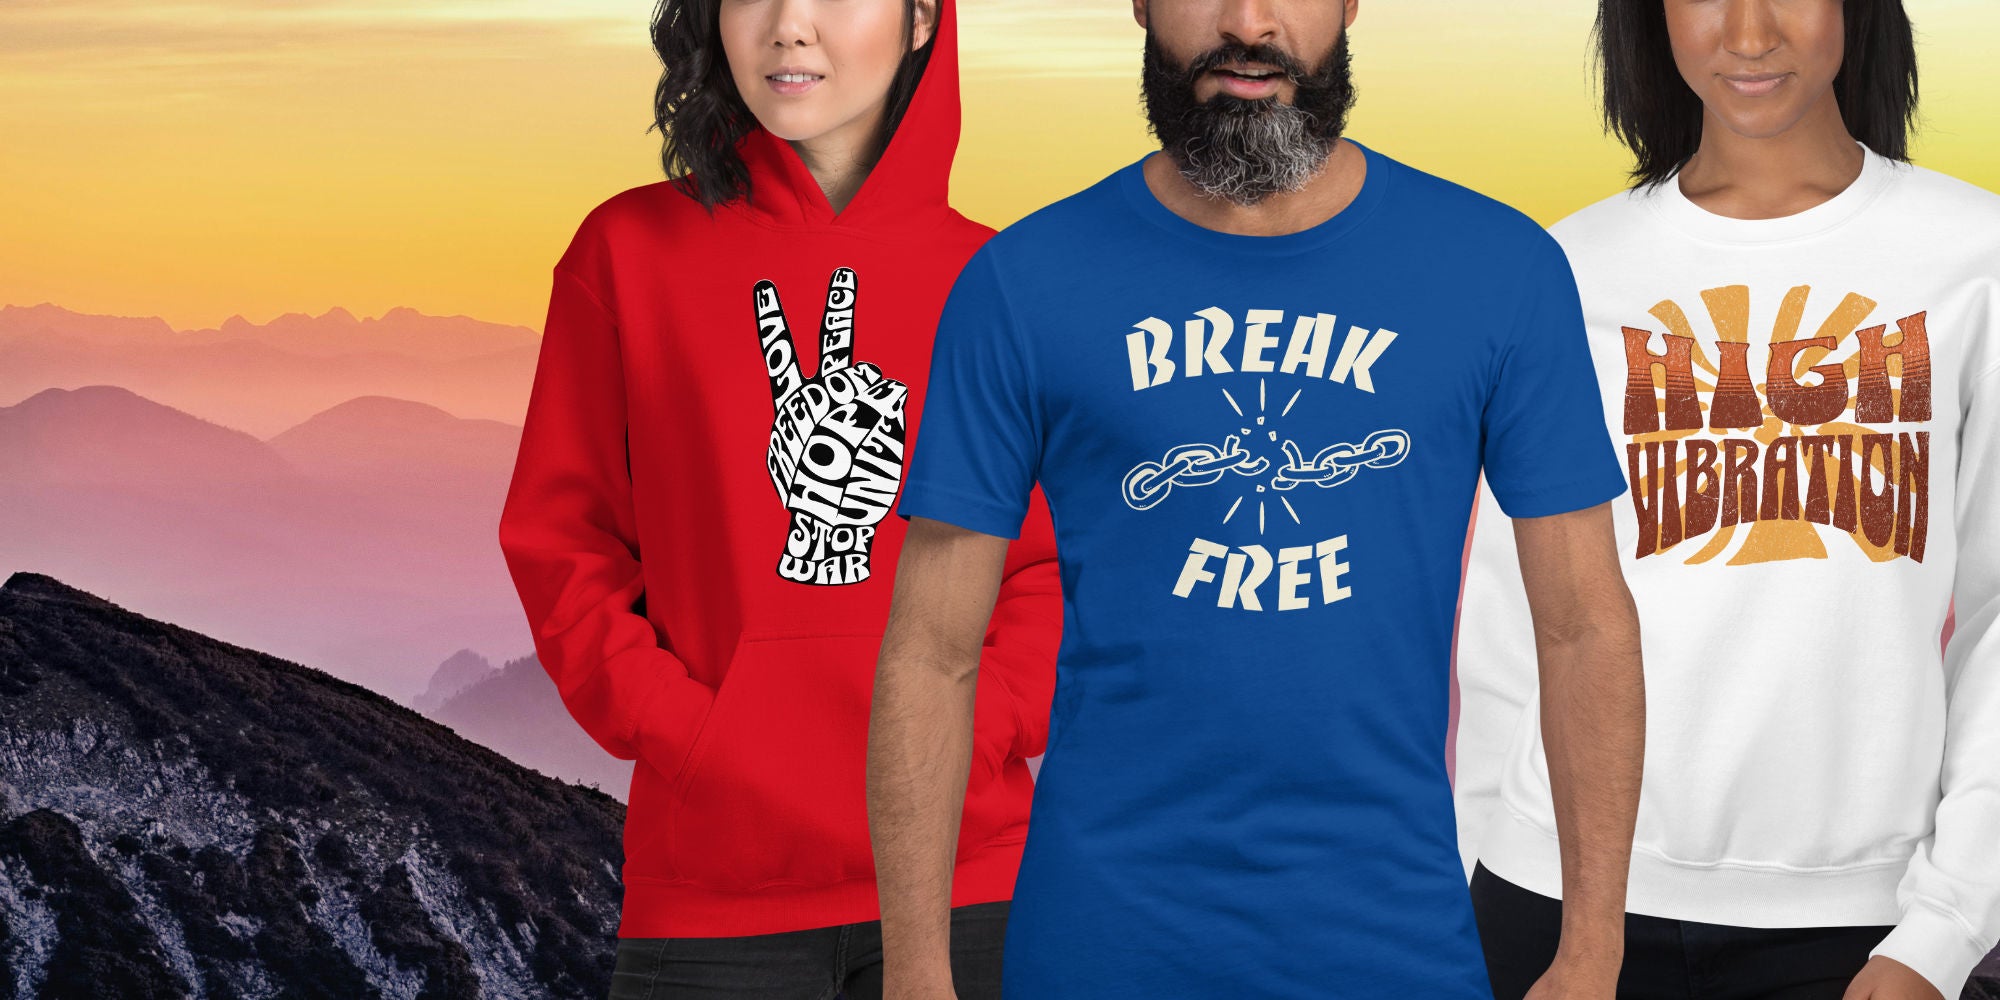 Apparel - Tees, Hoodies and Sweatshirts from AscensionEmporium.net